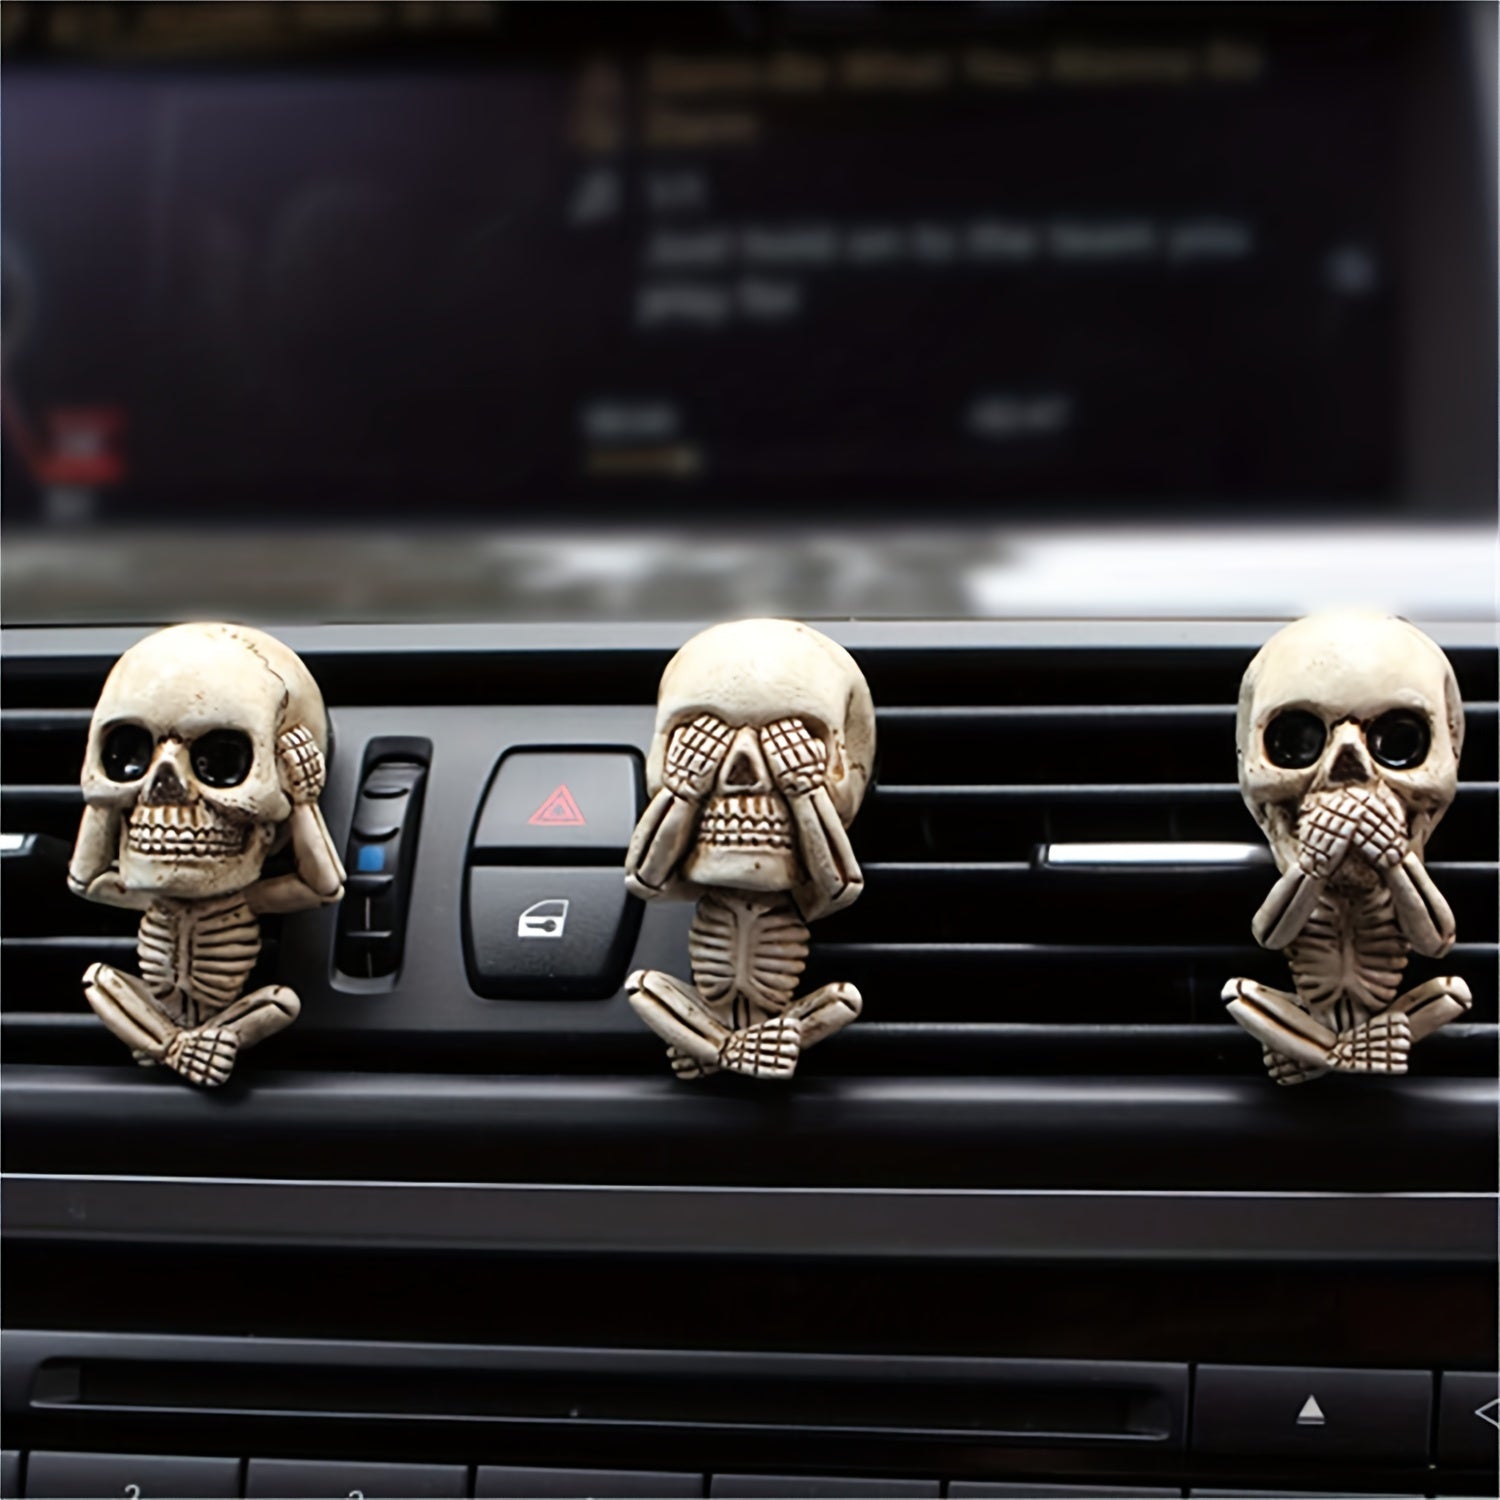 3pcs Ghost Head Aromatherapy Pendant Set - Creative Resin Car Air Outlet Aromatherapy Ornament - Gothic Decoration for Halloween Home Decor